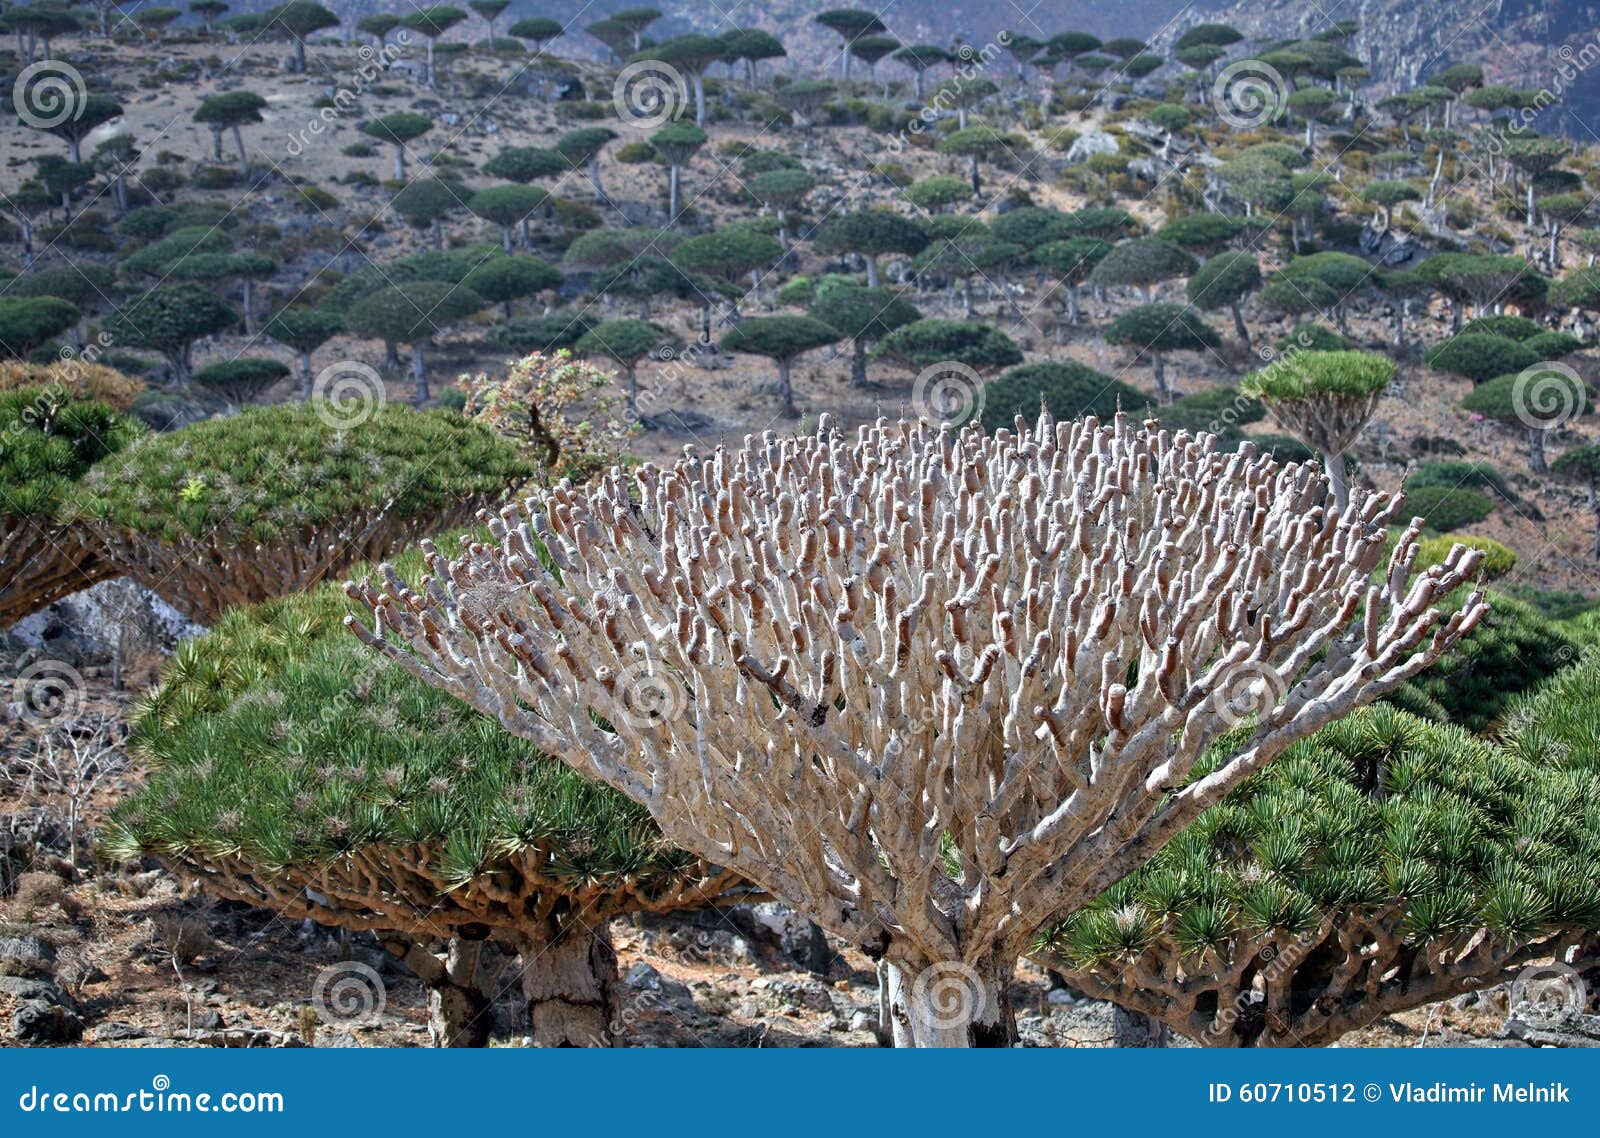 462 Tree Blood Dead Photos Free Royalty Free Stock Photos From Dreamstime